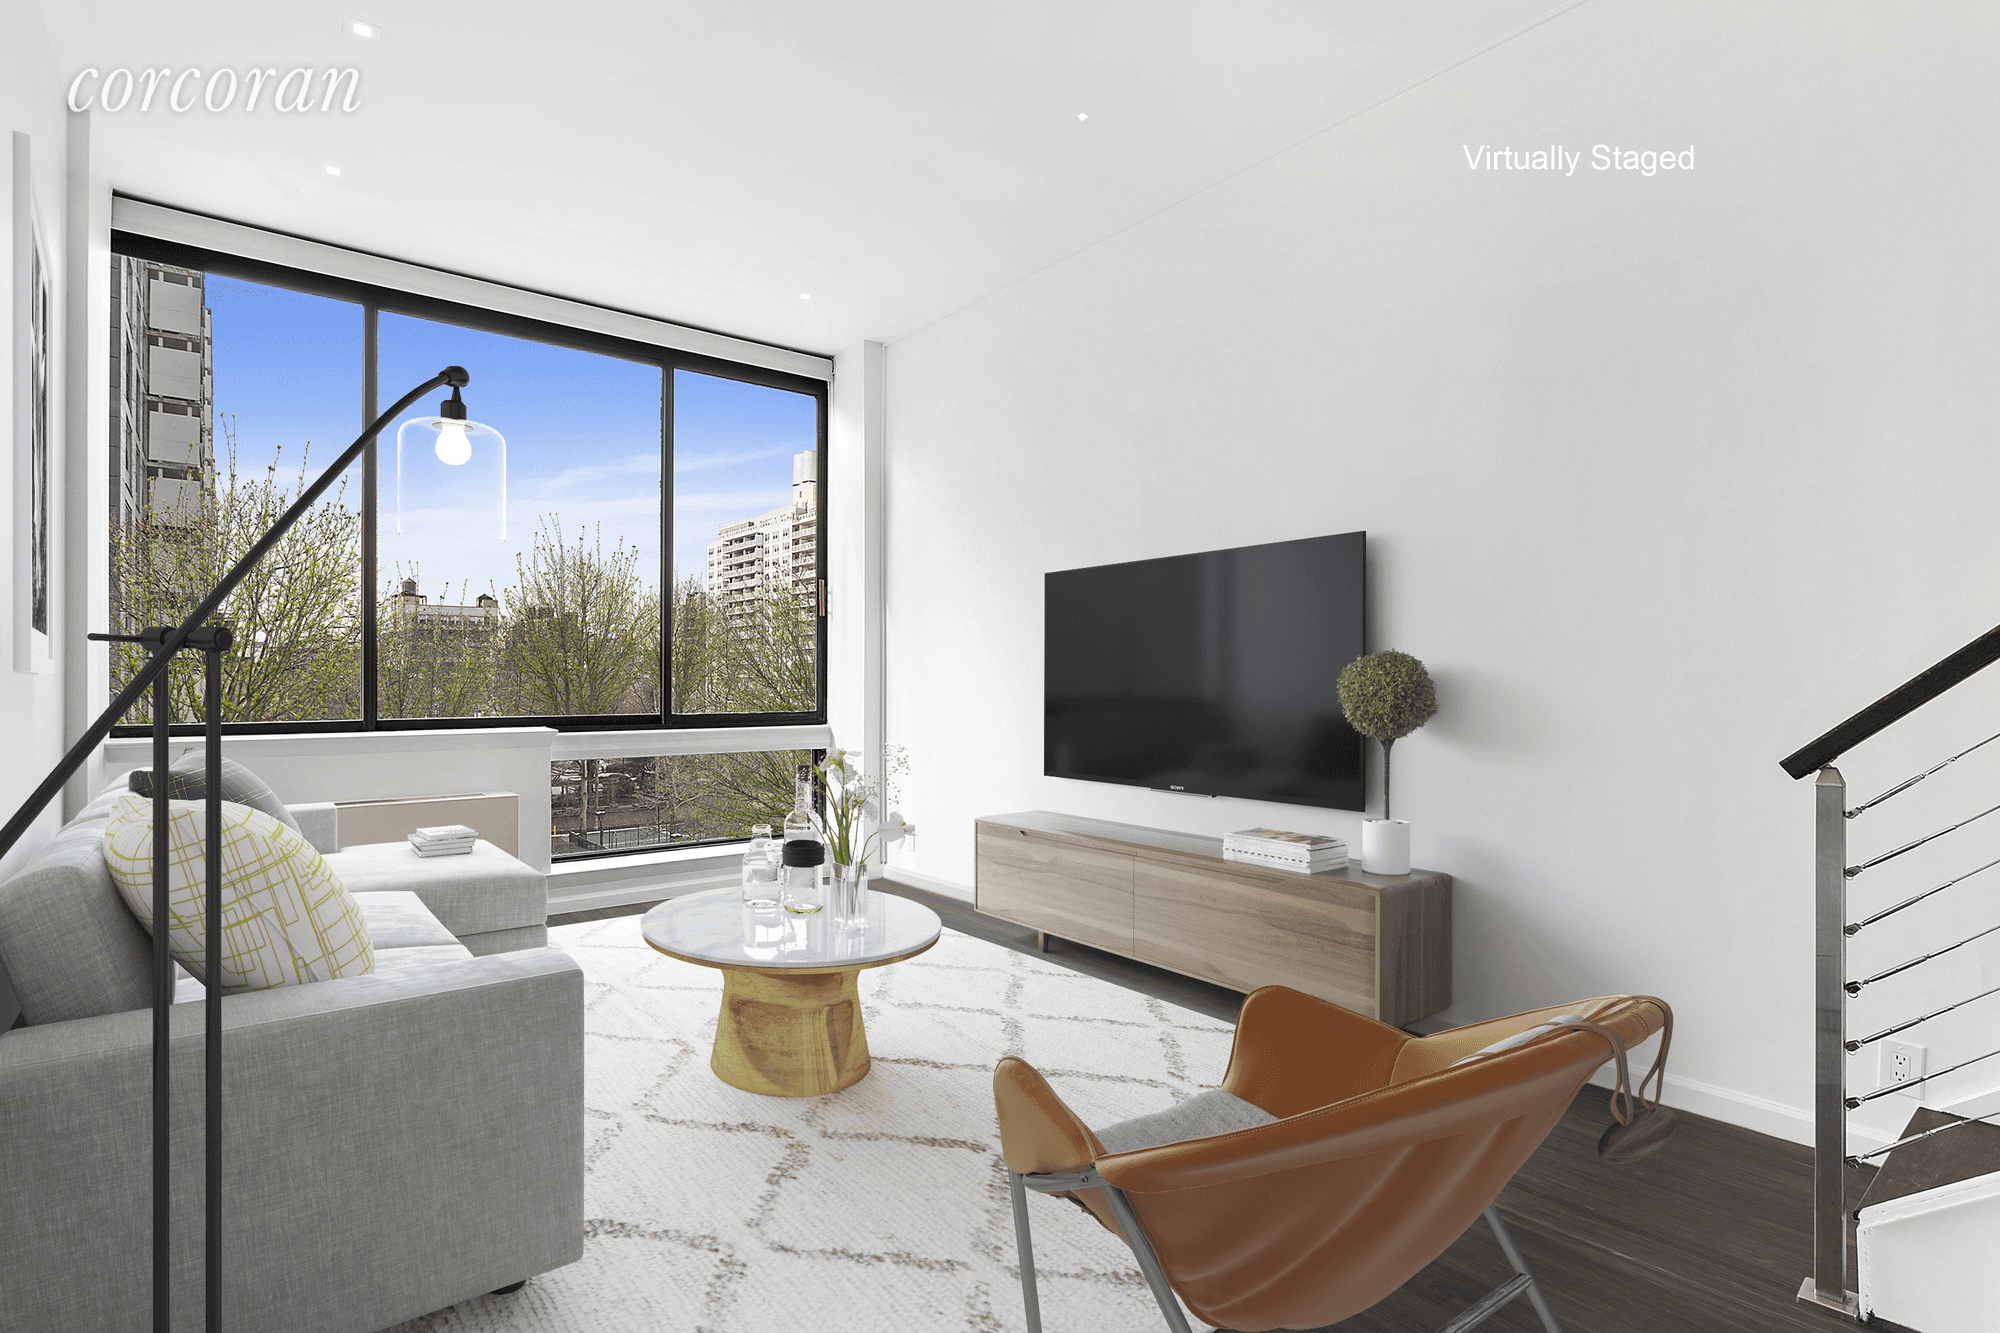 Be home in residence 509 at 77 Bleecker, a quiet and peaceful, sun drenched 1 bedroom directly overlooking the colorful tree tops of Mercer Street Park.